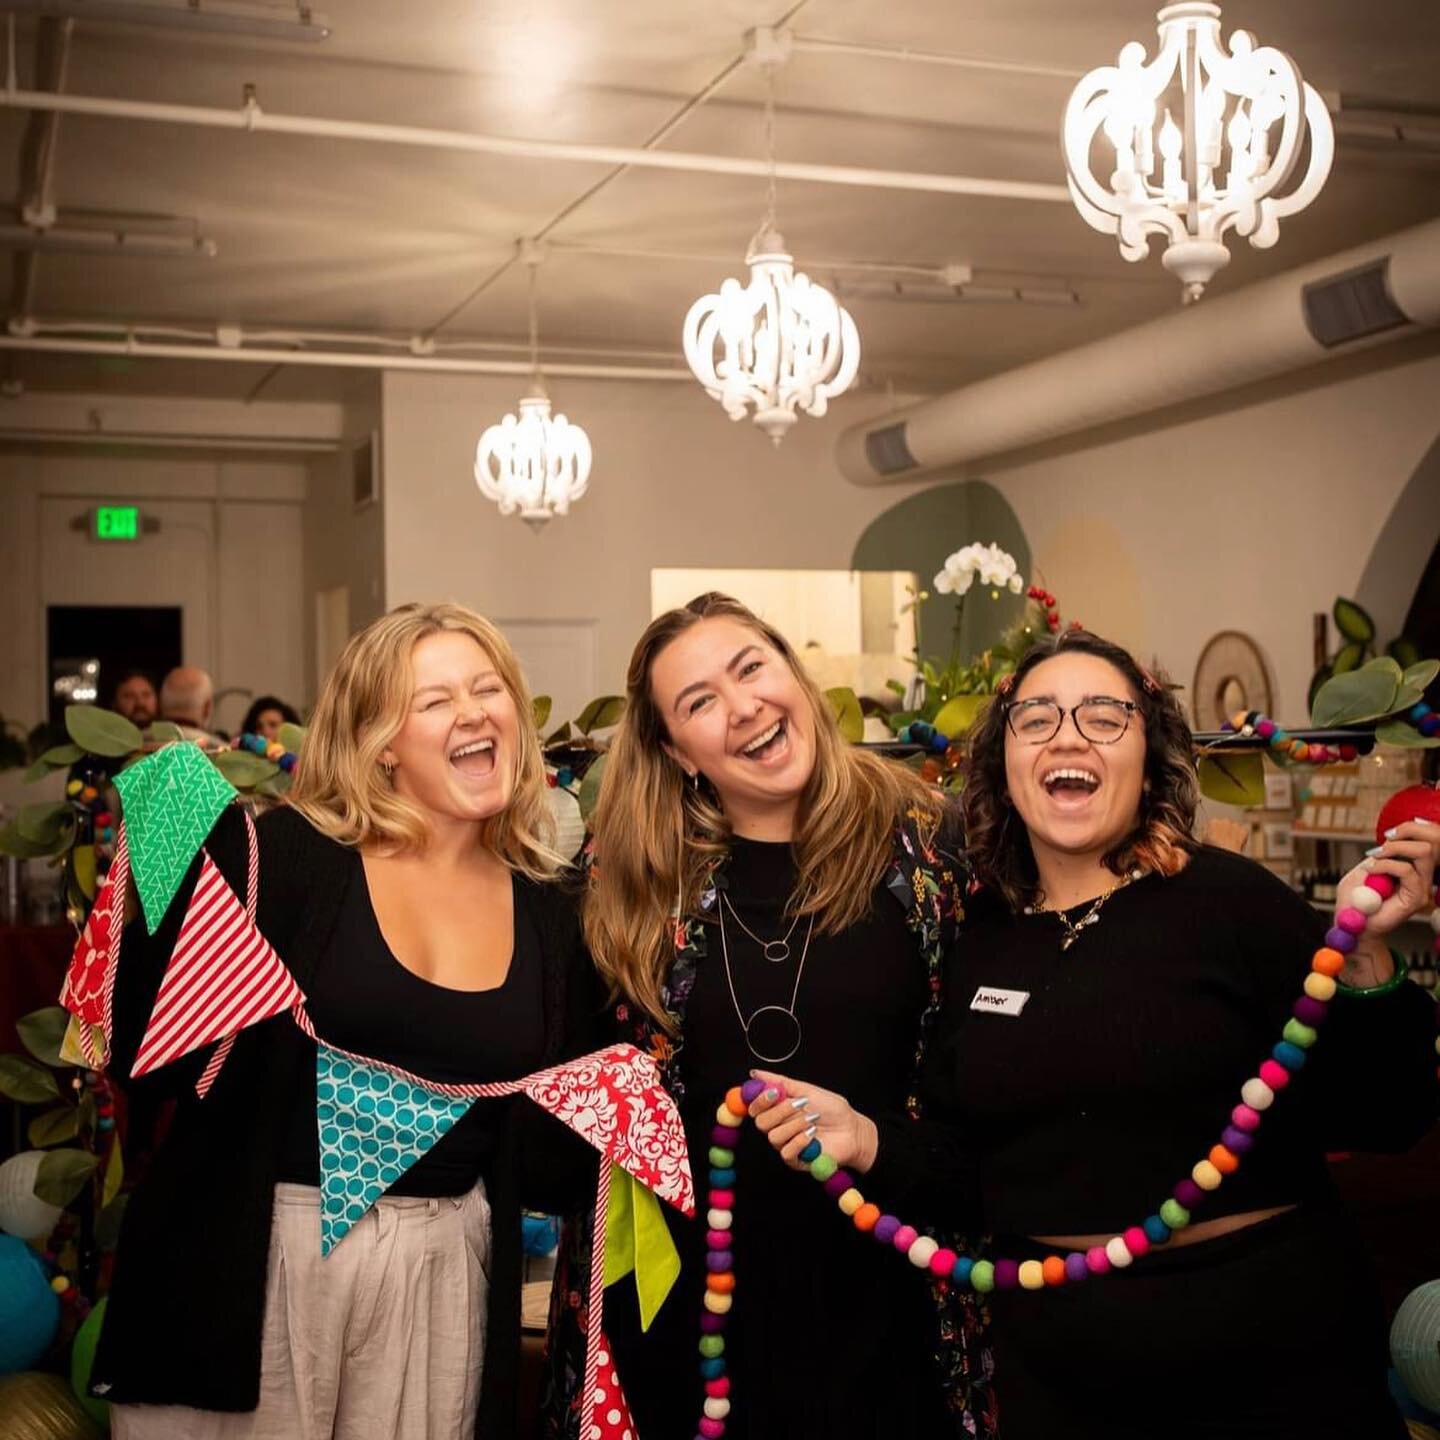 We had a blast cohosting the #sustainablesoiree this past Friday with our friends from @sunkissedpantry @joinwinecult @ecostiks and @raizfelizshop @womenseconomicventures 🌱 ✨ 🎉 🎄 

So grateful to have a community of local business owners that are 